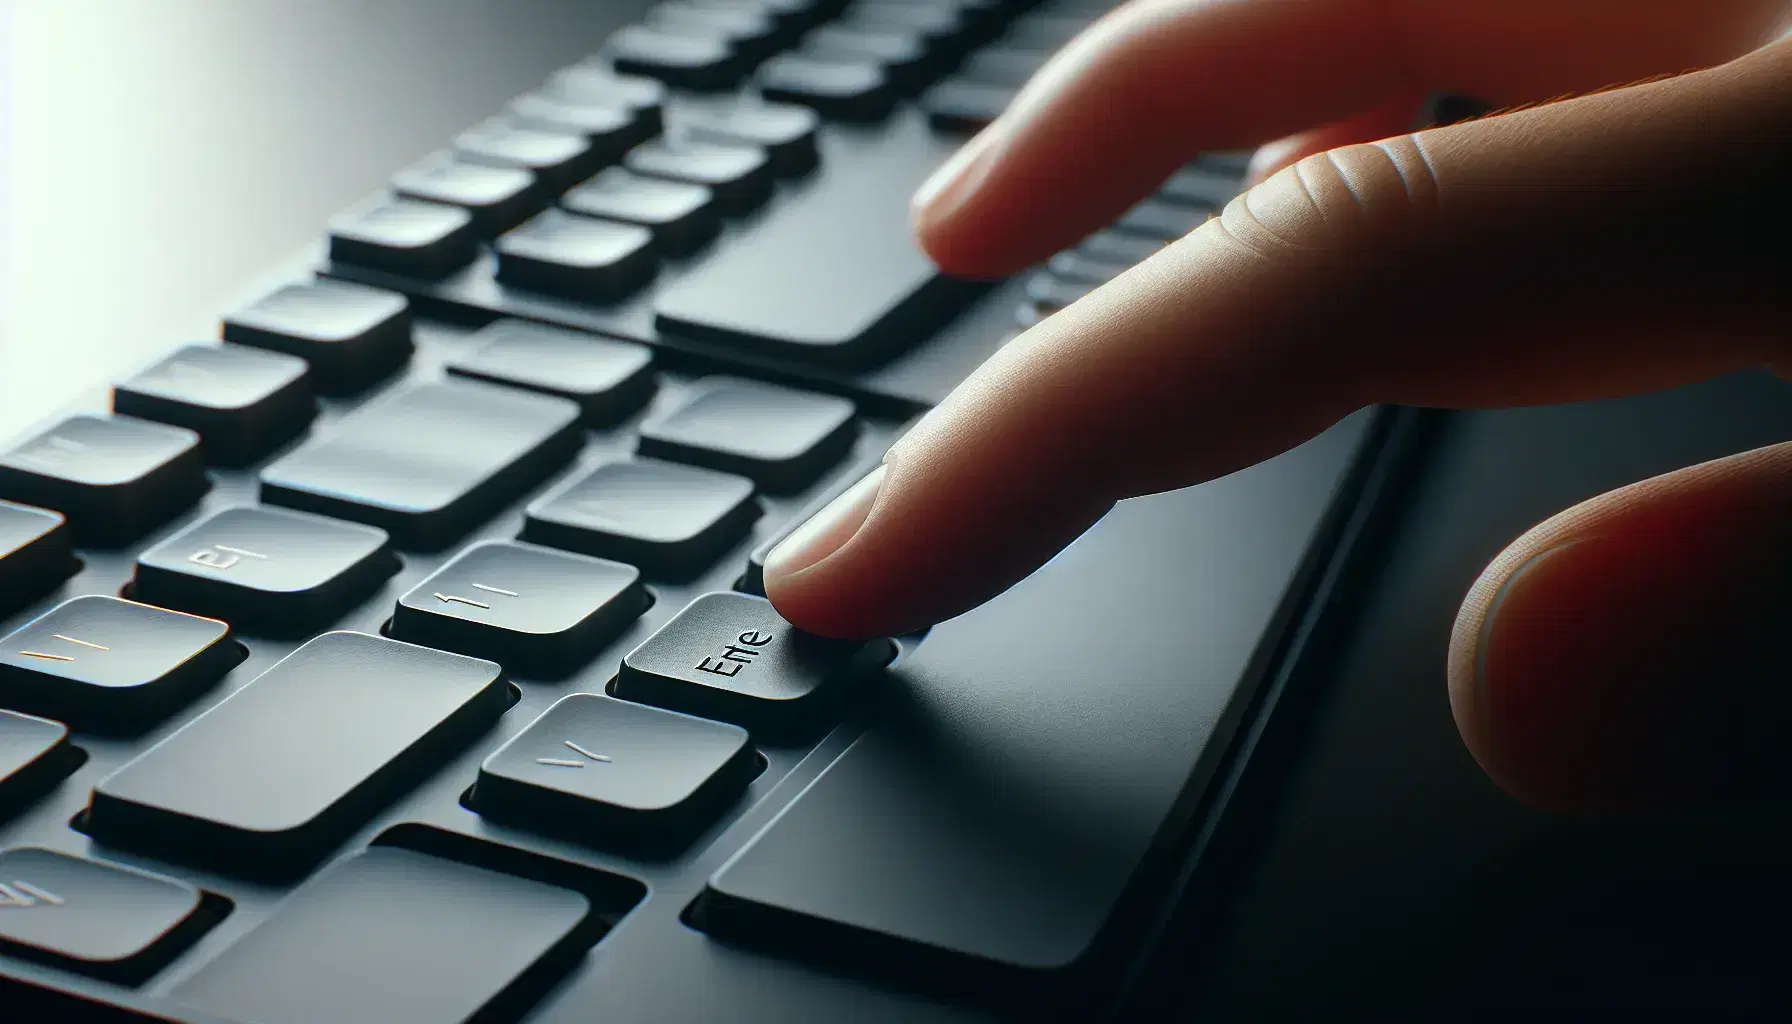 Close-up of a modern computer keyboard with "Enter" key pressed by an index finger, black keys on a matte background, QWERTY layout.